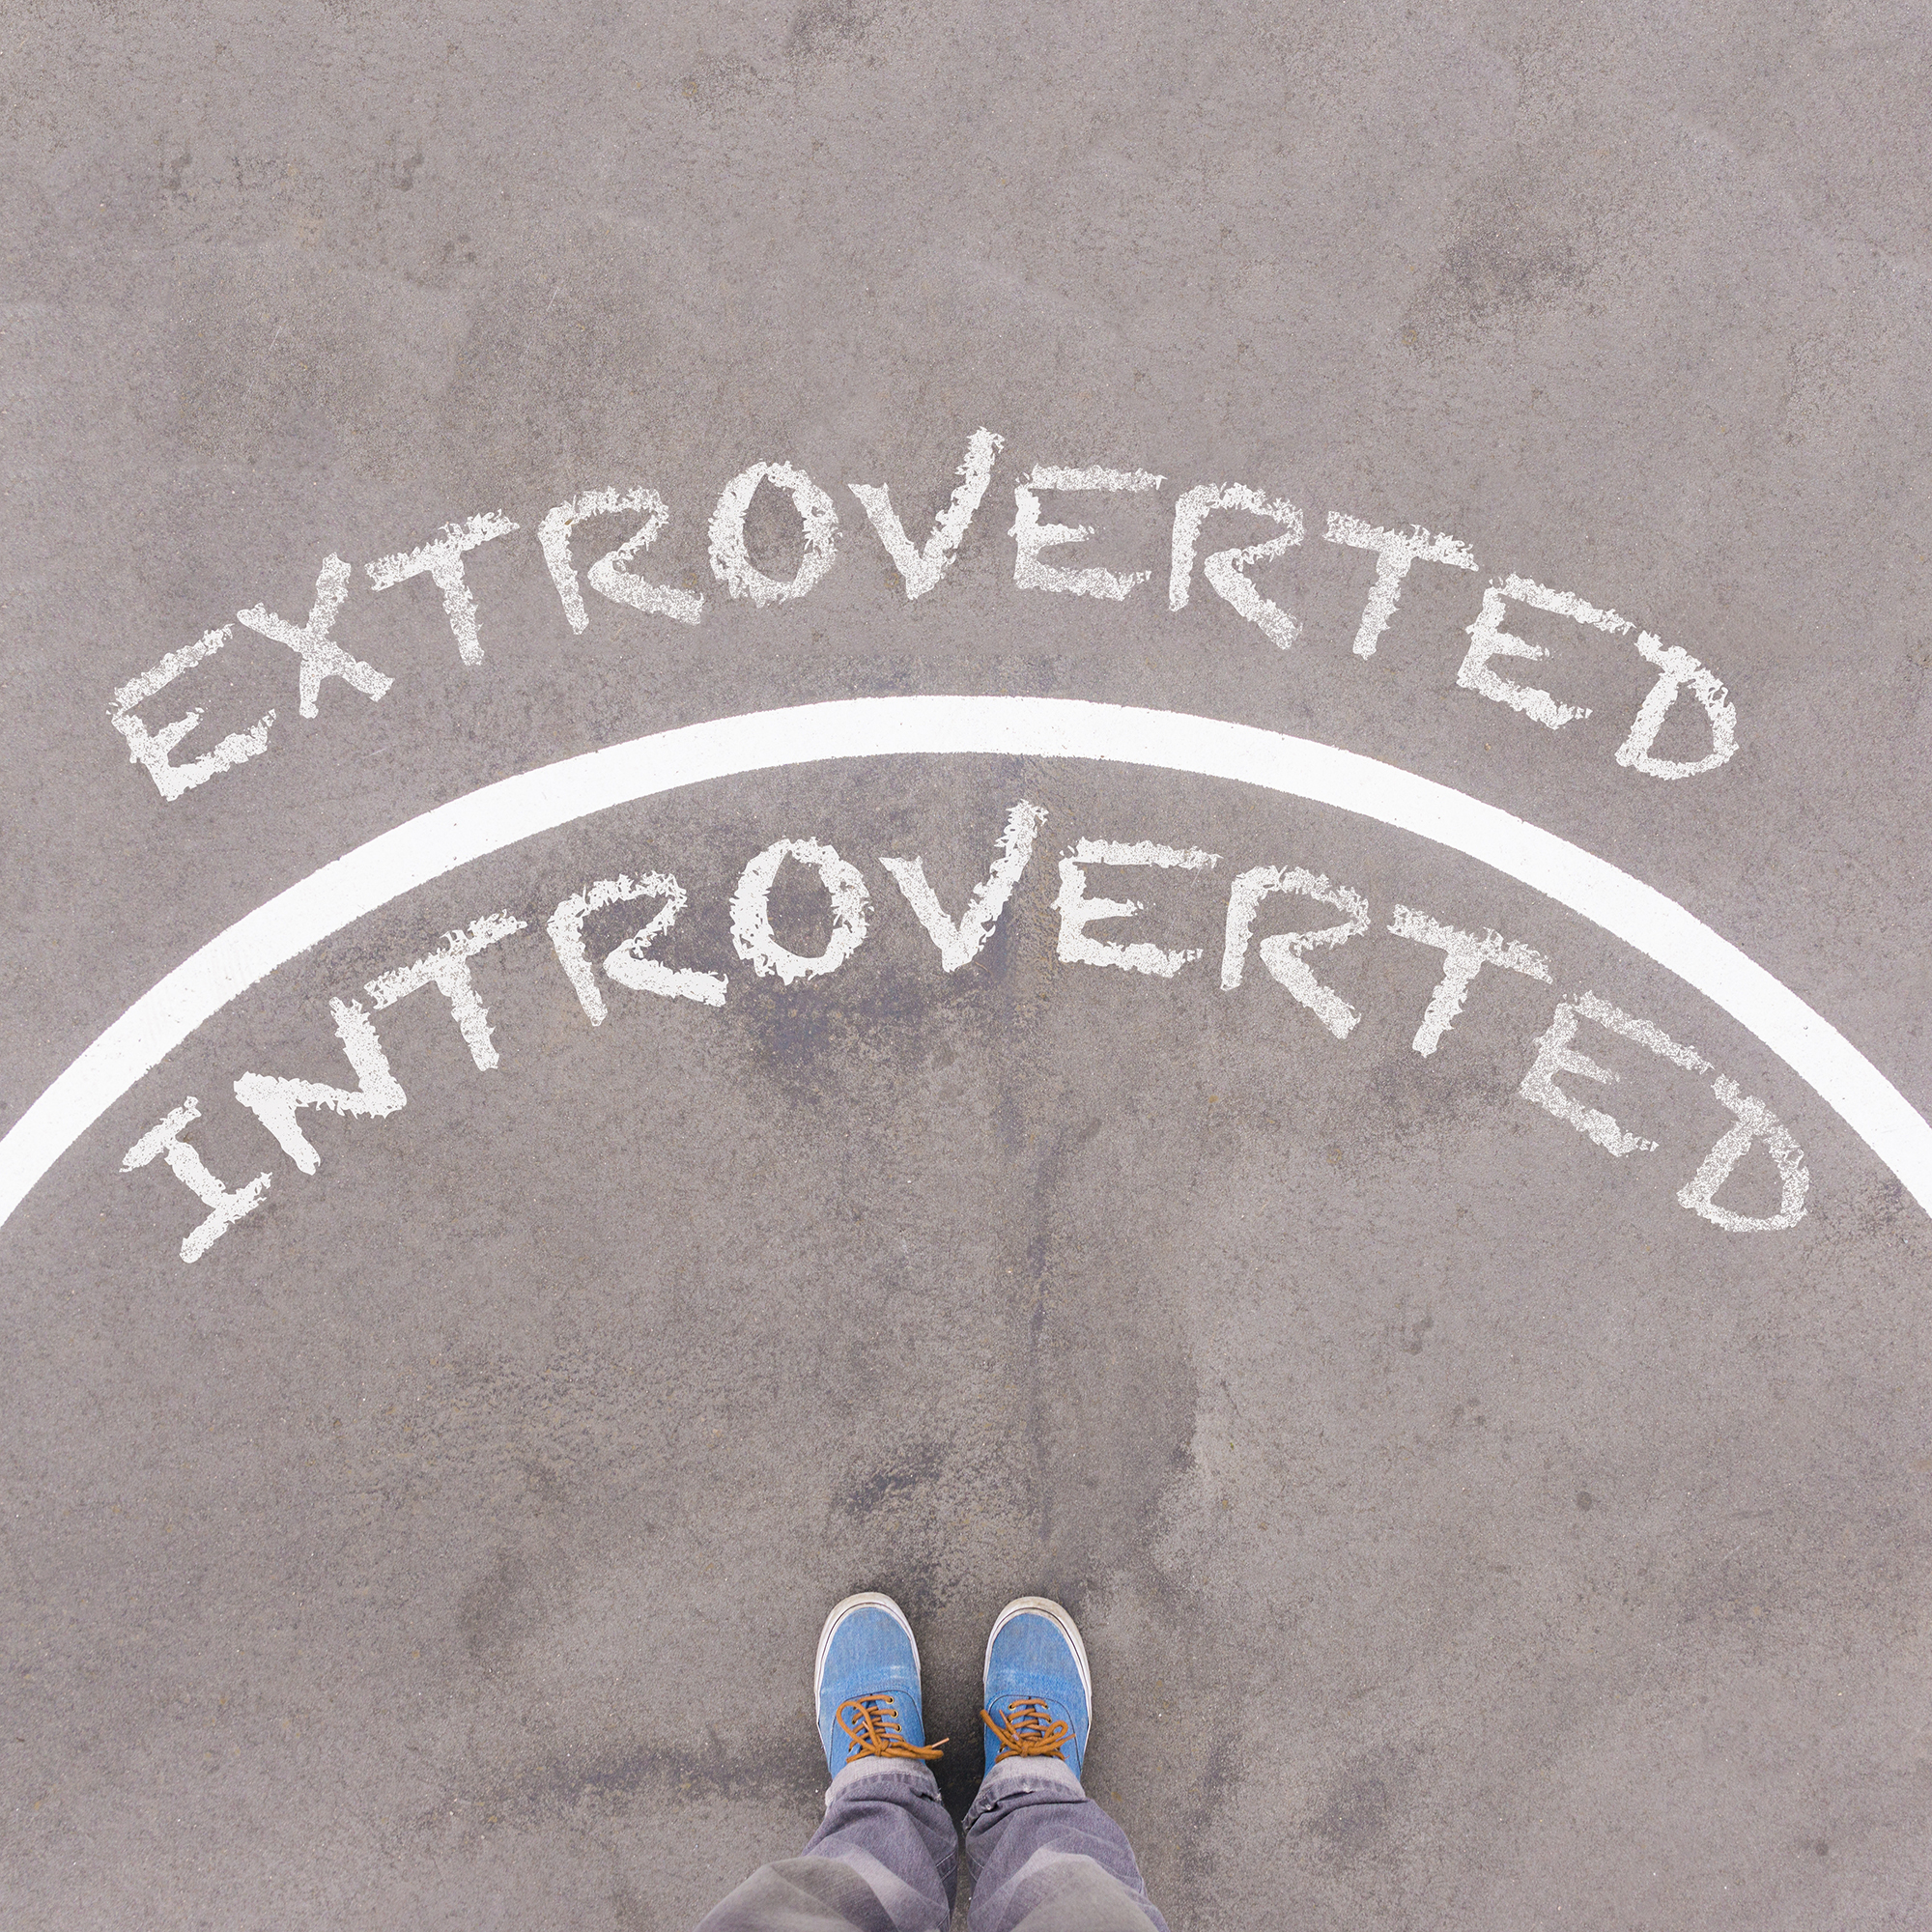 Extroverted vs Introverted text on asphalt ground, feet and shoes on floor, personal perspective footsie concept